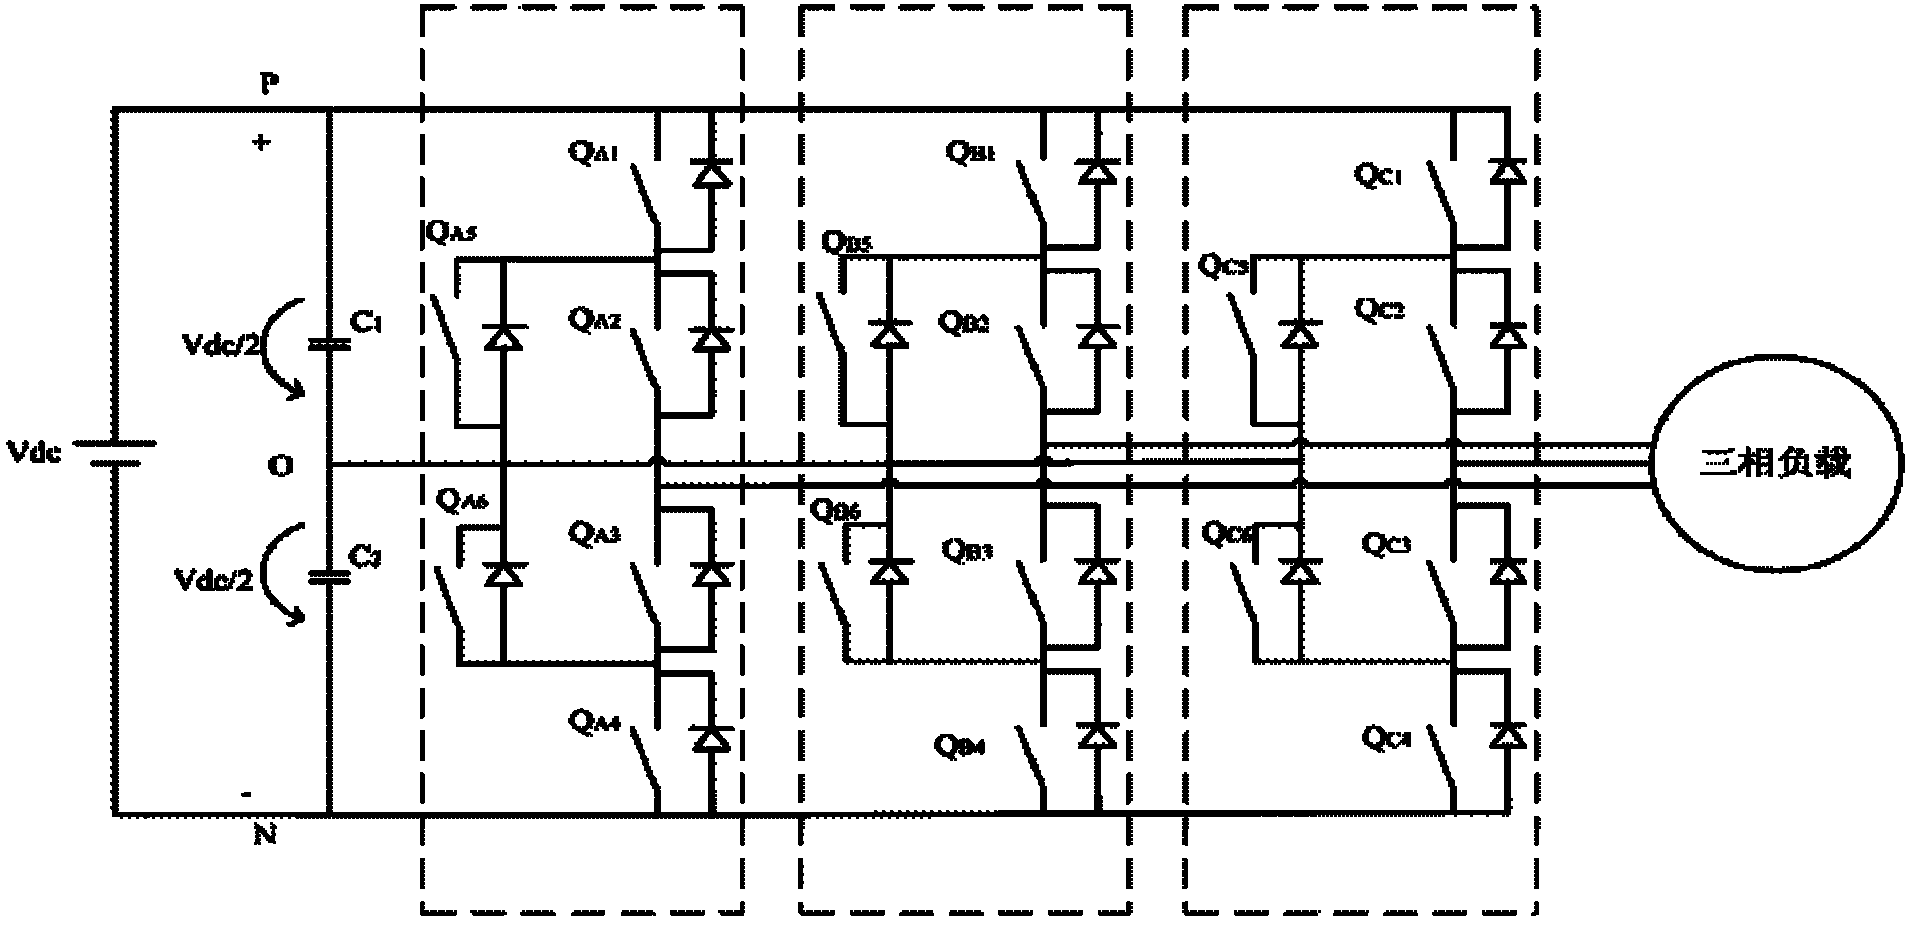 Active clamping three-level zero-voltage soft-switching converter using coupled inductor